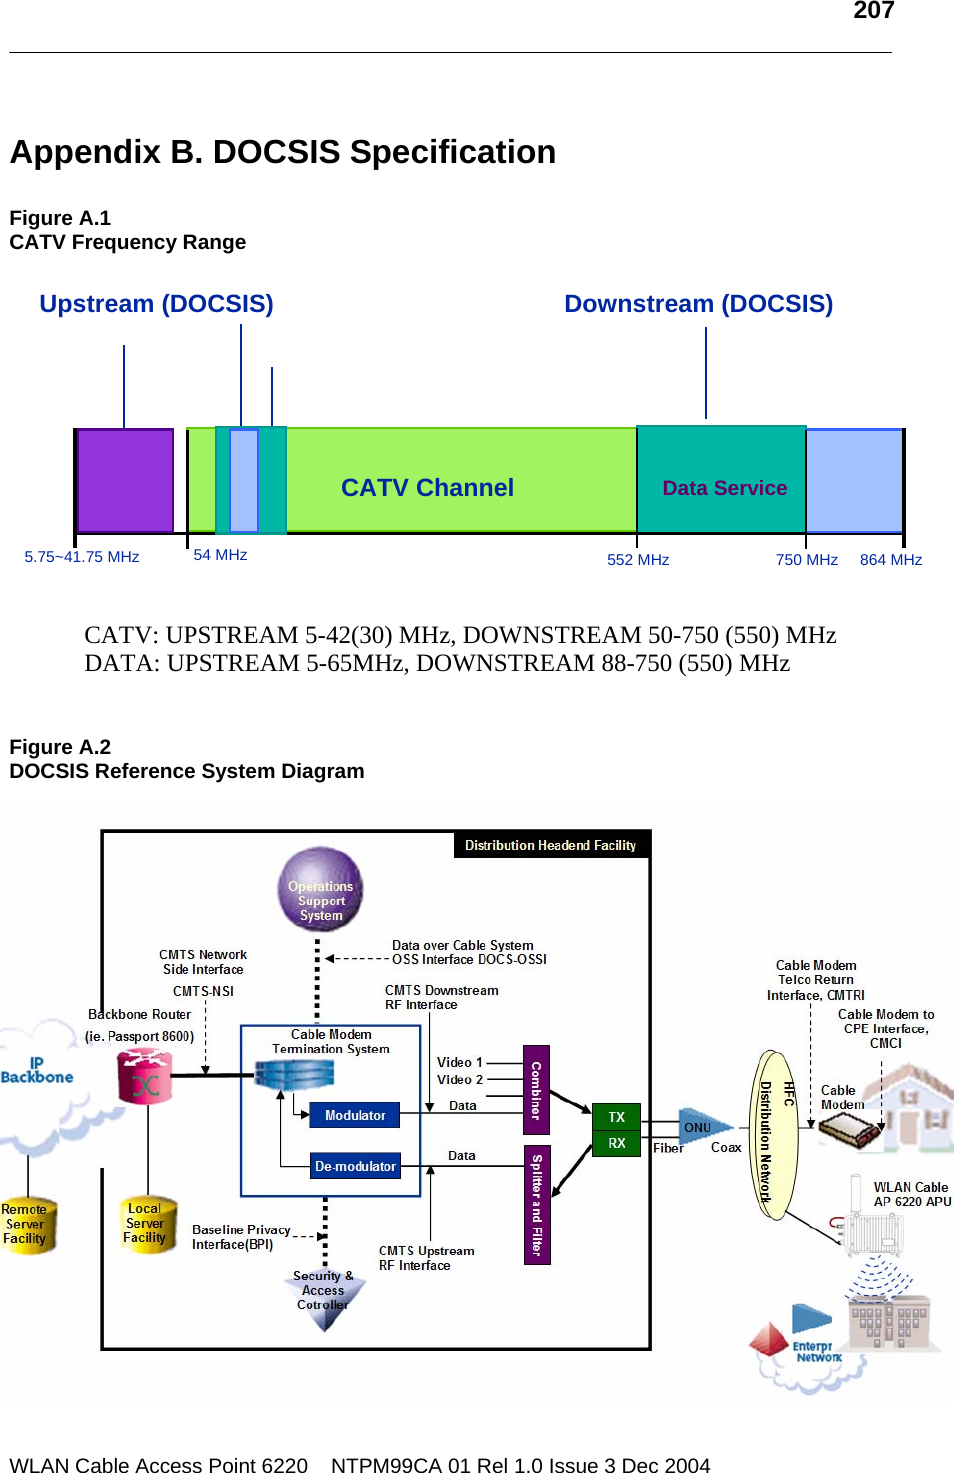   207  WLAN Cable Access Point 6220    NTPM99CA 01 Rel 1.0 Issue 3 Dec 2004 Appendix B. DOCSIS Specification  Figure A.1 CATV Frequency Range   CATV: UPSTREAM 5-42(30) MHz, DOWNSTREAM 50-750 (550) MHz             DATA: UPSTREAM 5-65MHz, DOWNSTREAM 88-750 (550) MHz   Figure A.2 DOCSIS Reference System Diagram   Upstream (DOCSIS) 54 MHz  750 MHz 5.75~41.75 MHz  552 MHz  864 MHz CATV Channel  DataServiceDownstream (DOCSIS) 